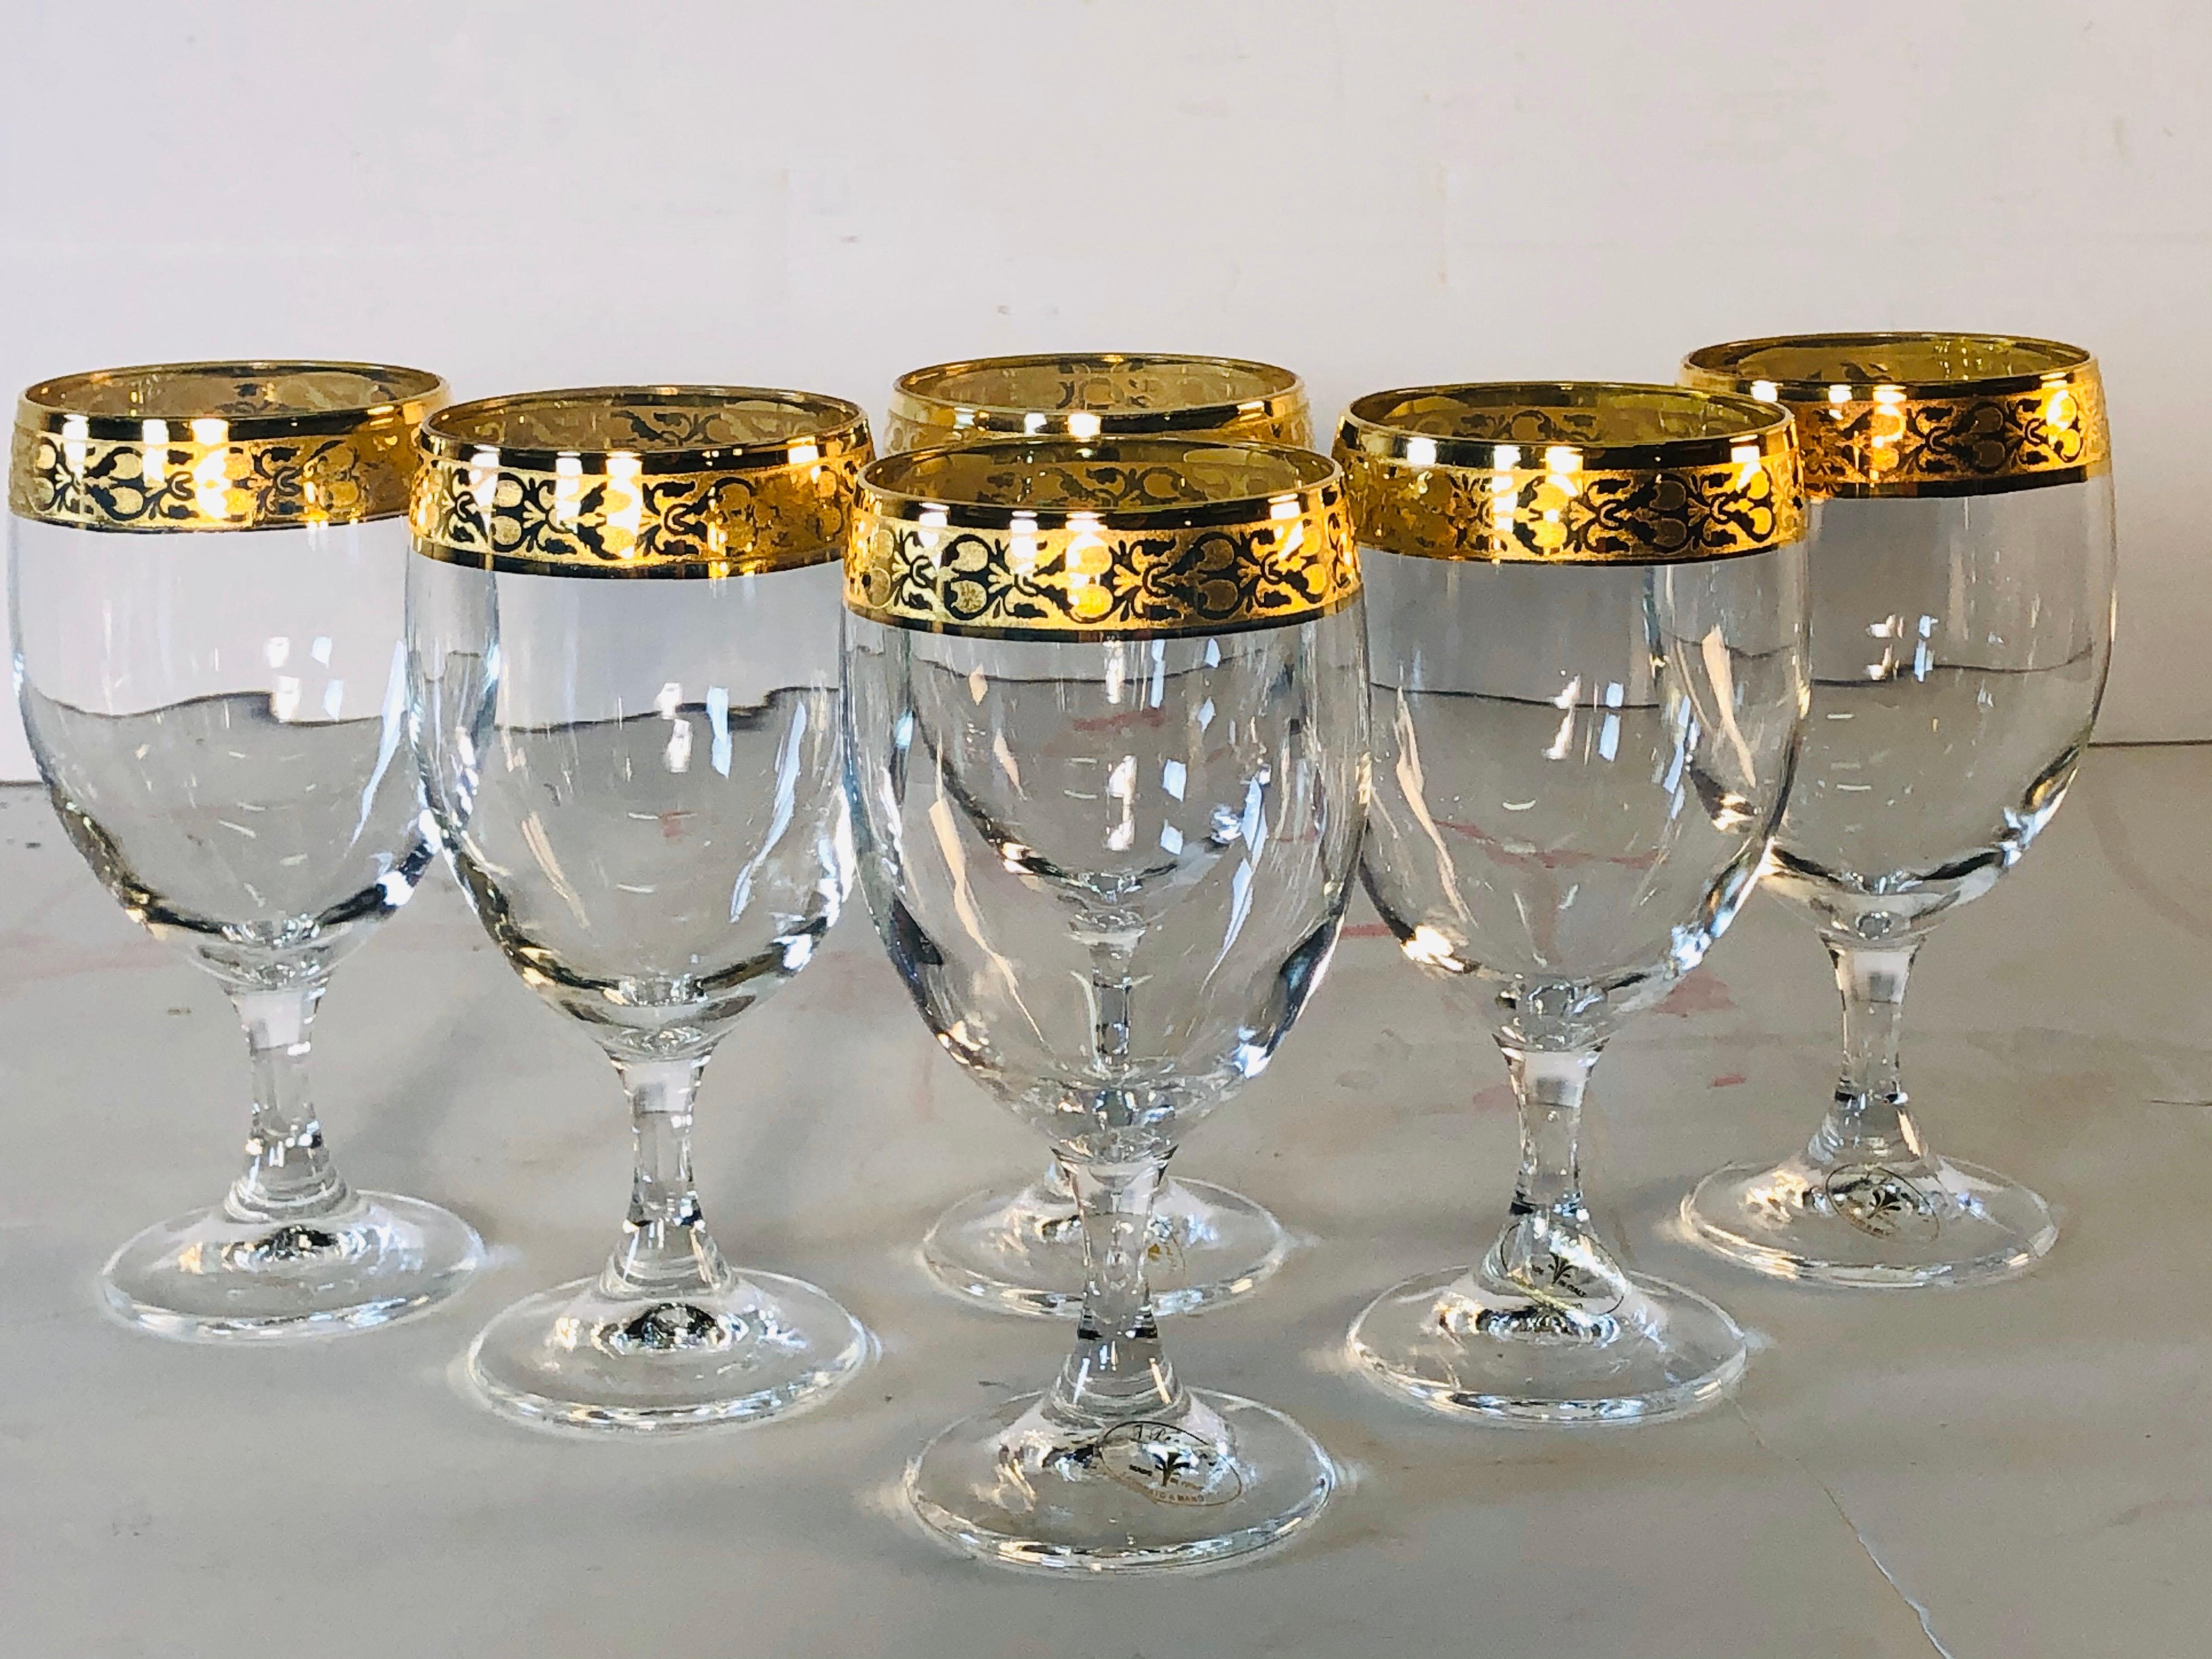 Vintage 1970s set of six Italian Mirano glass wine stems with a wide gold banded rim. Marked with a plastic label. Excellent condition.